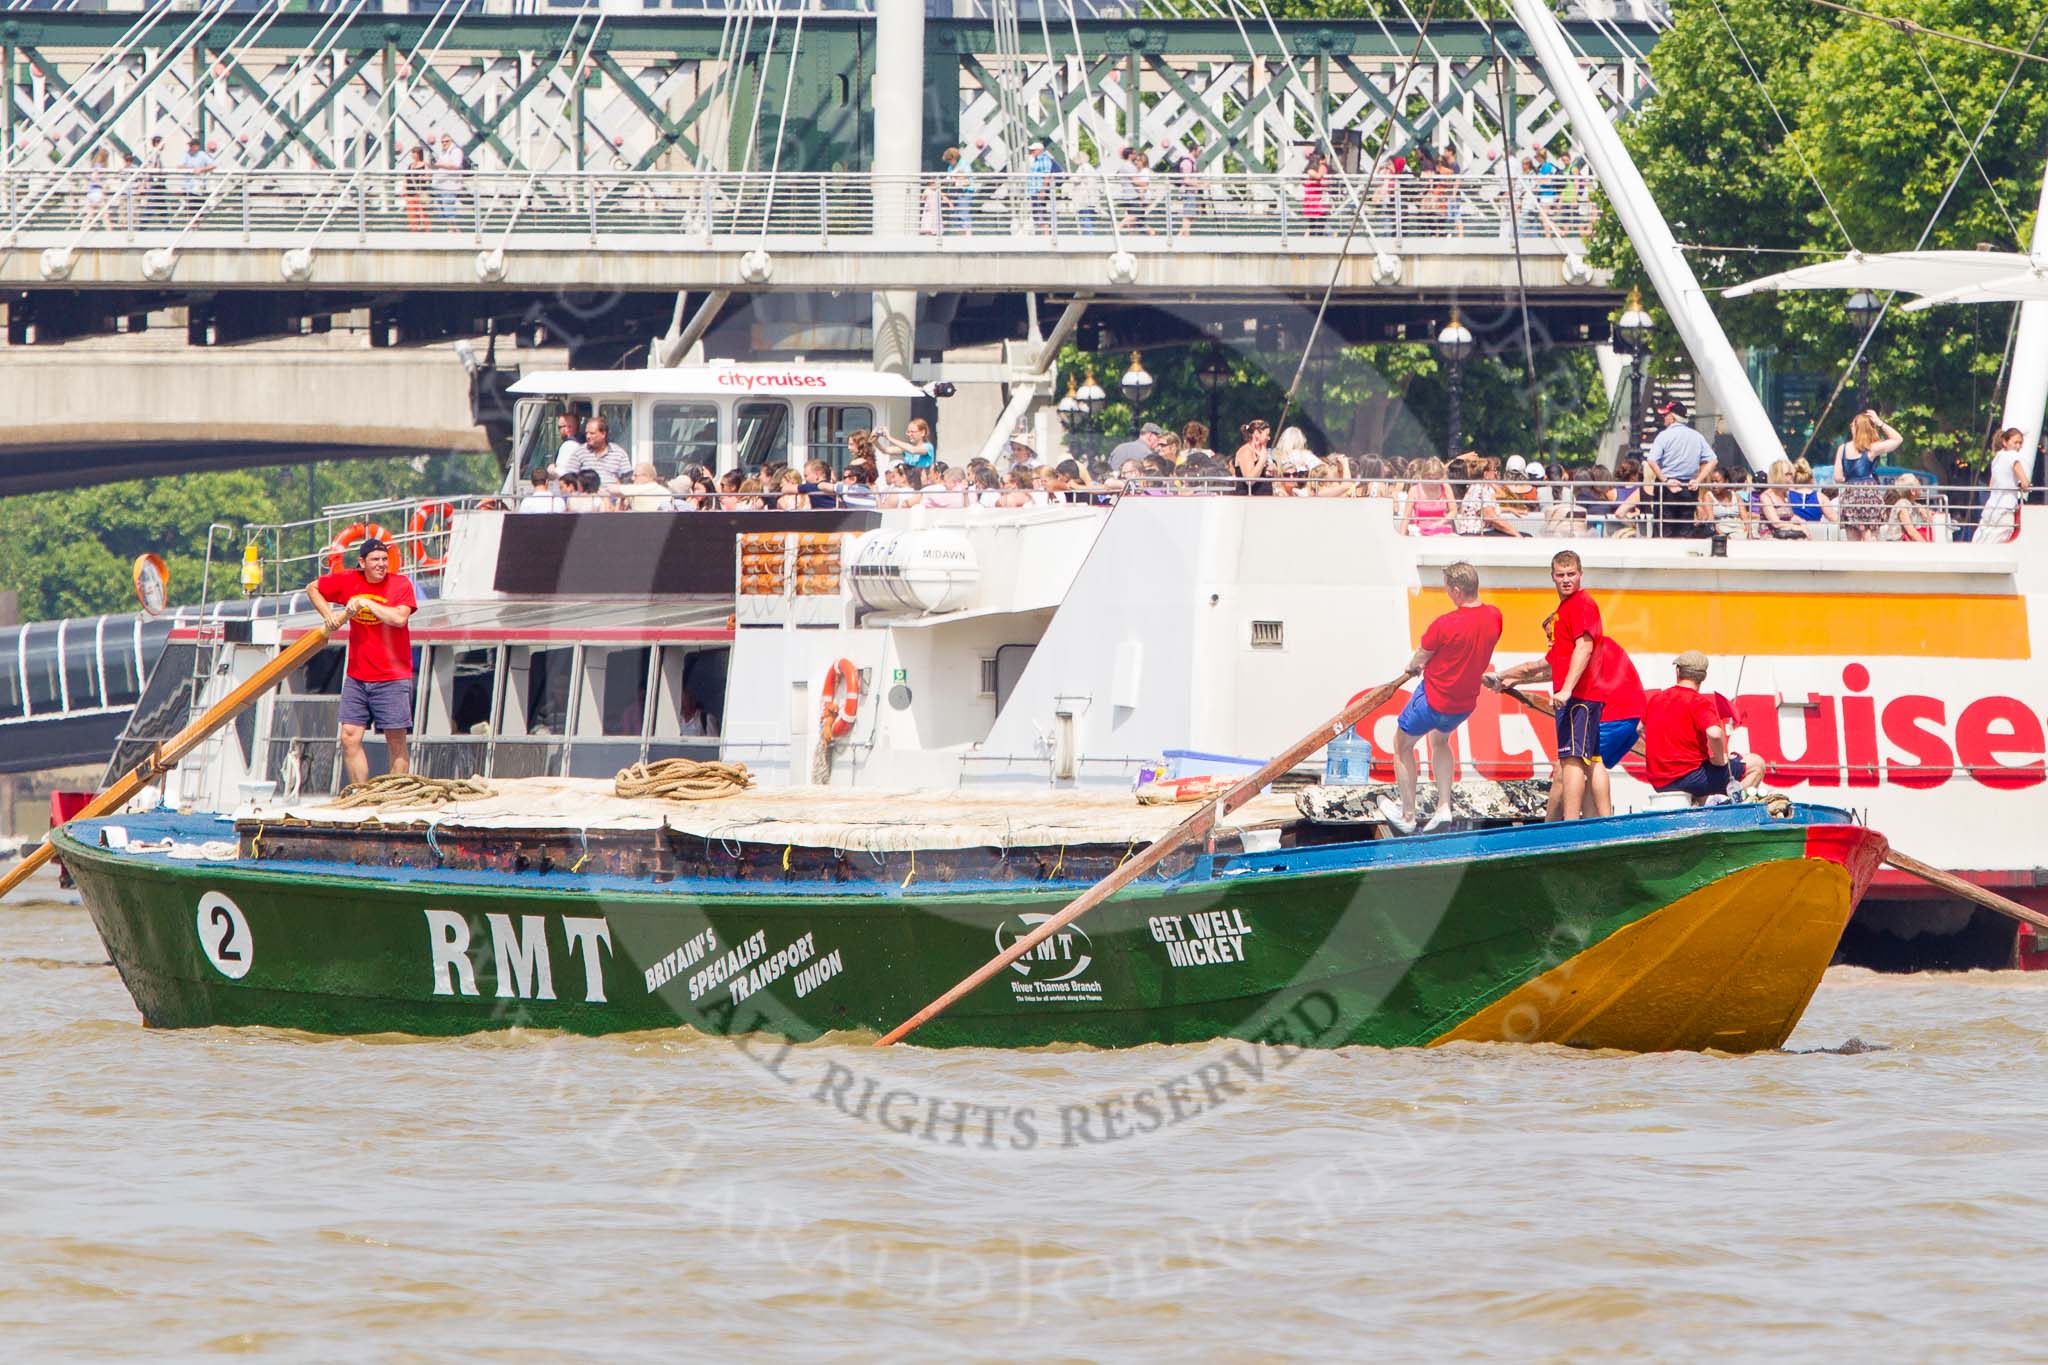 TOW River Thames Barge Driving Race 2013: Barge "Jane", by the RMT Union, passing Hungerford Bridge..
River Thames between Greenwich and Westminster,
London,

United Kingdom,
on 13 July 2013 at 14:28, image #470